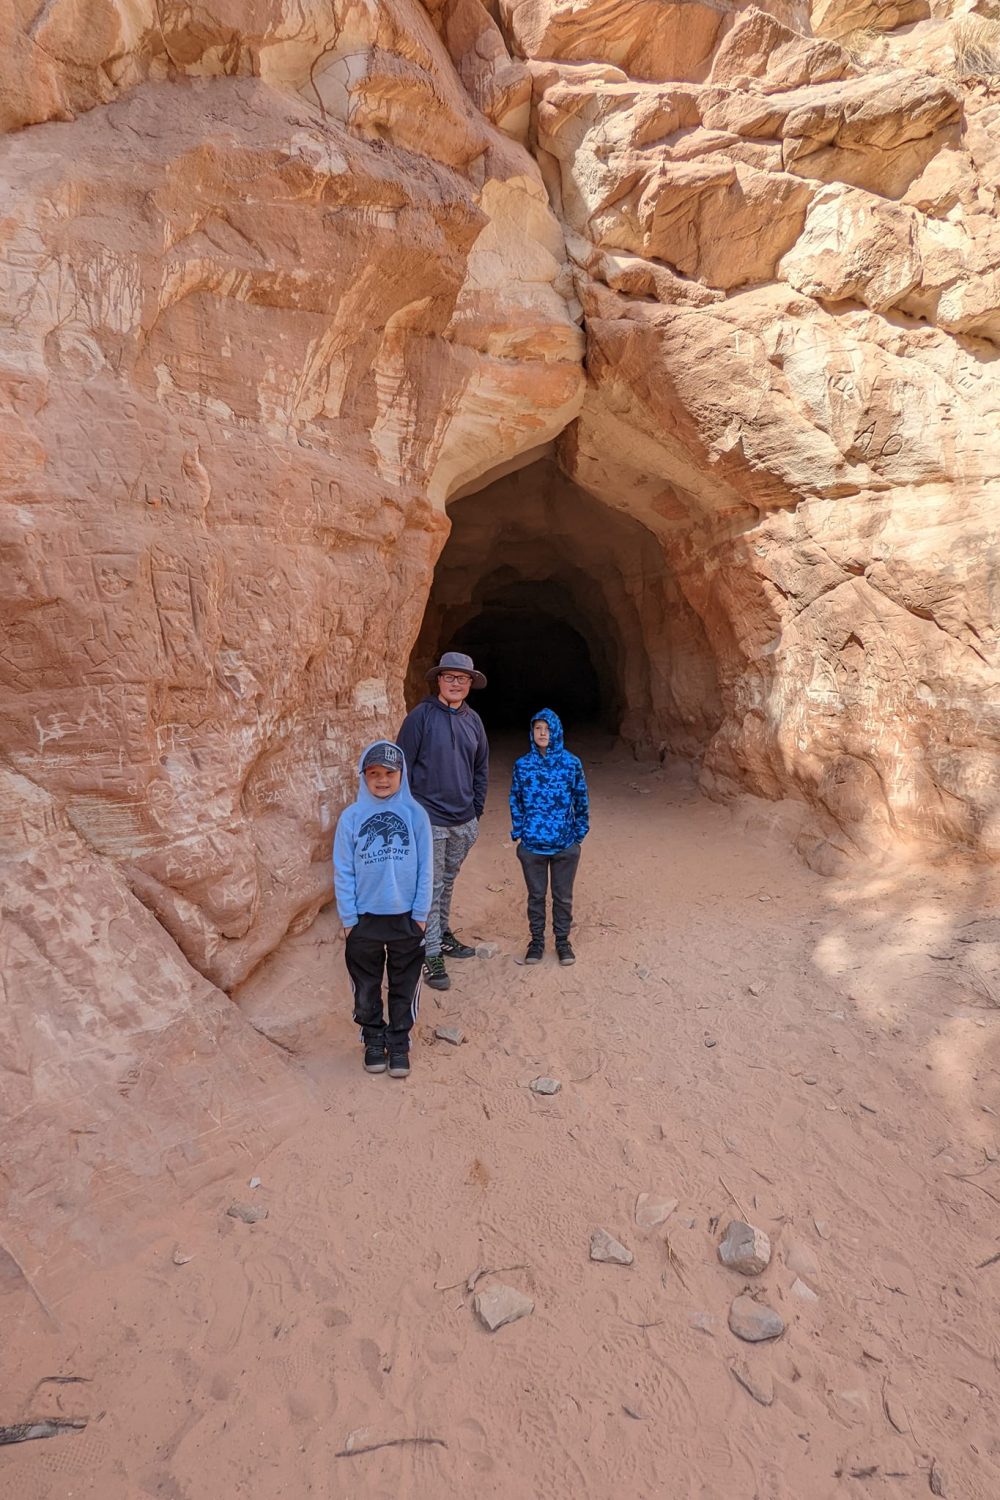 At the end of the Belly of the Dragon in Kanab, Utah